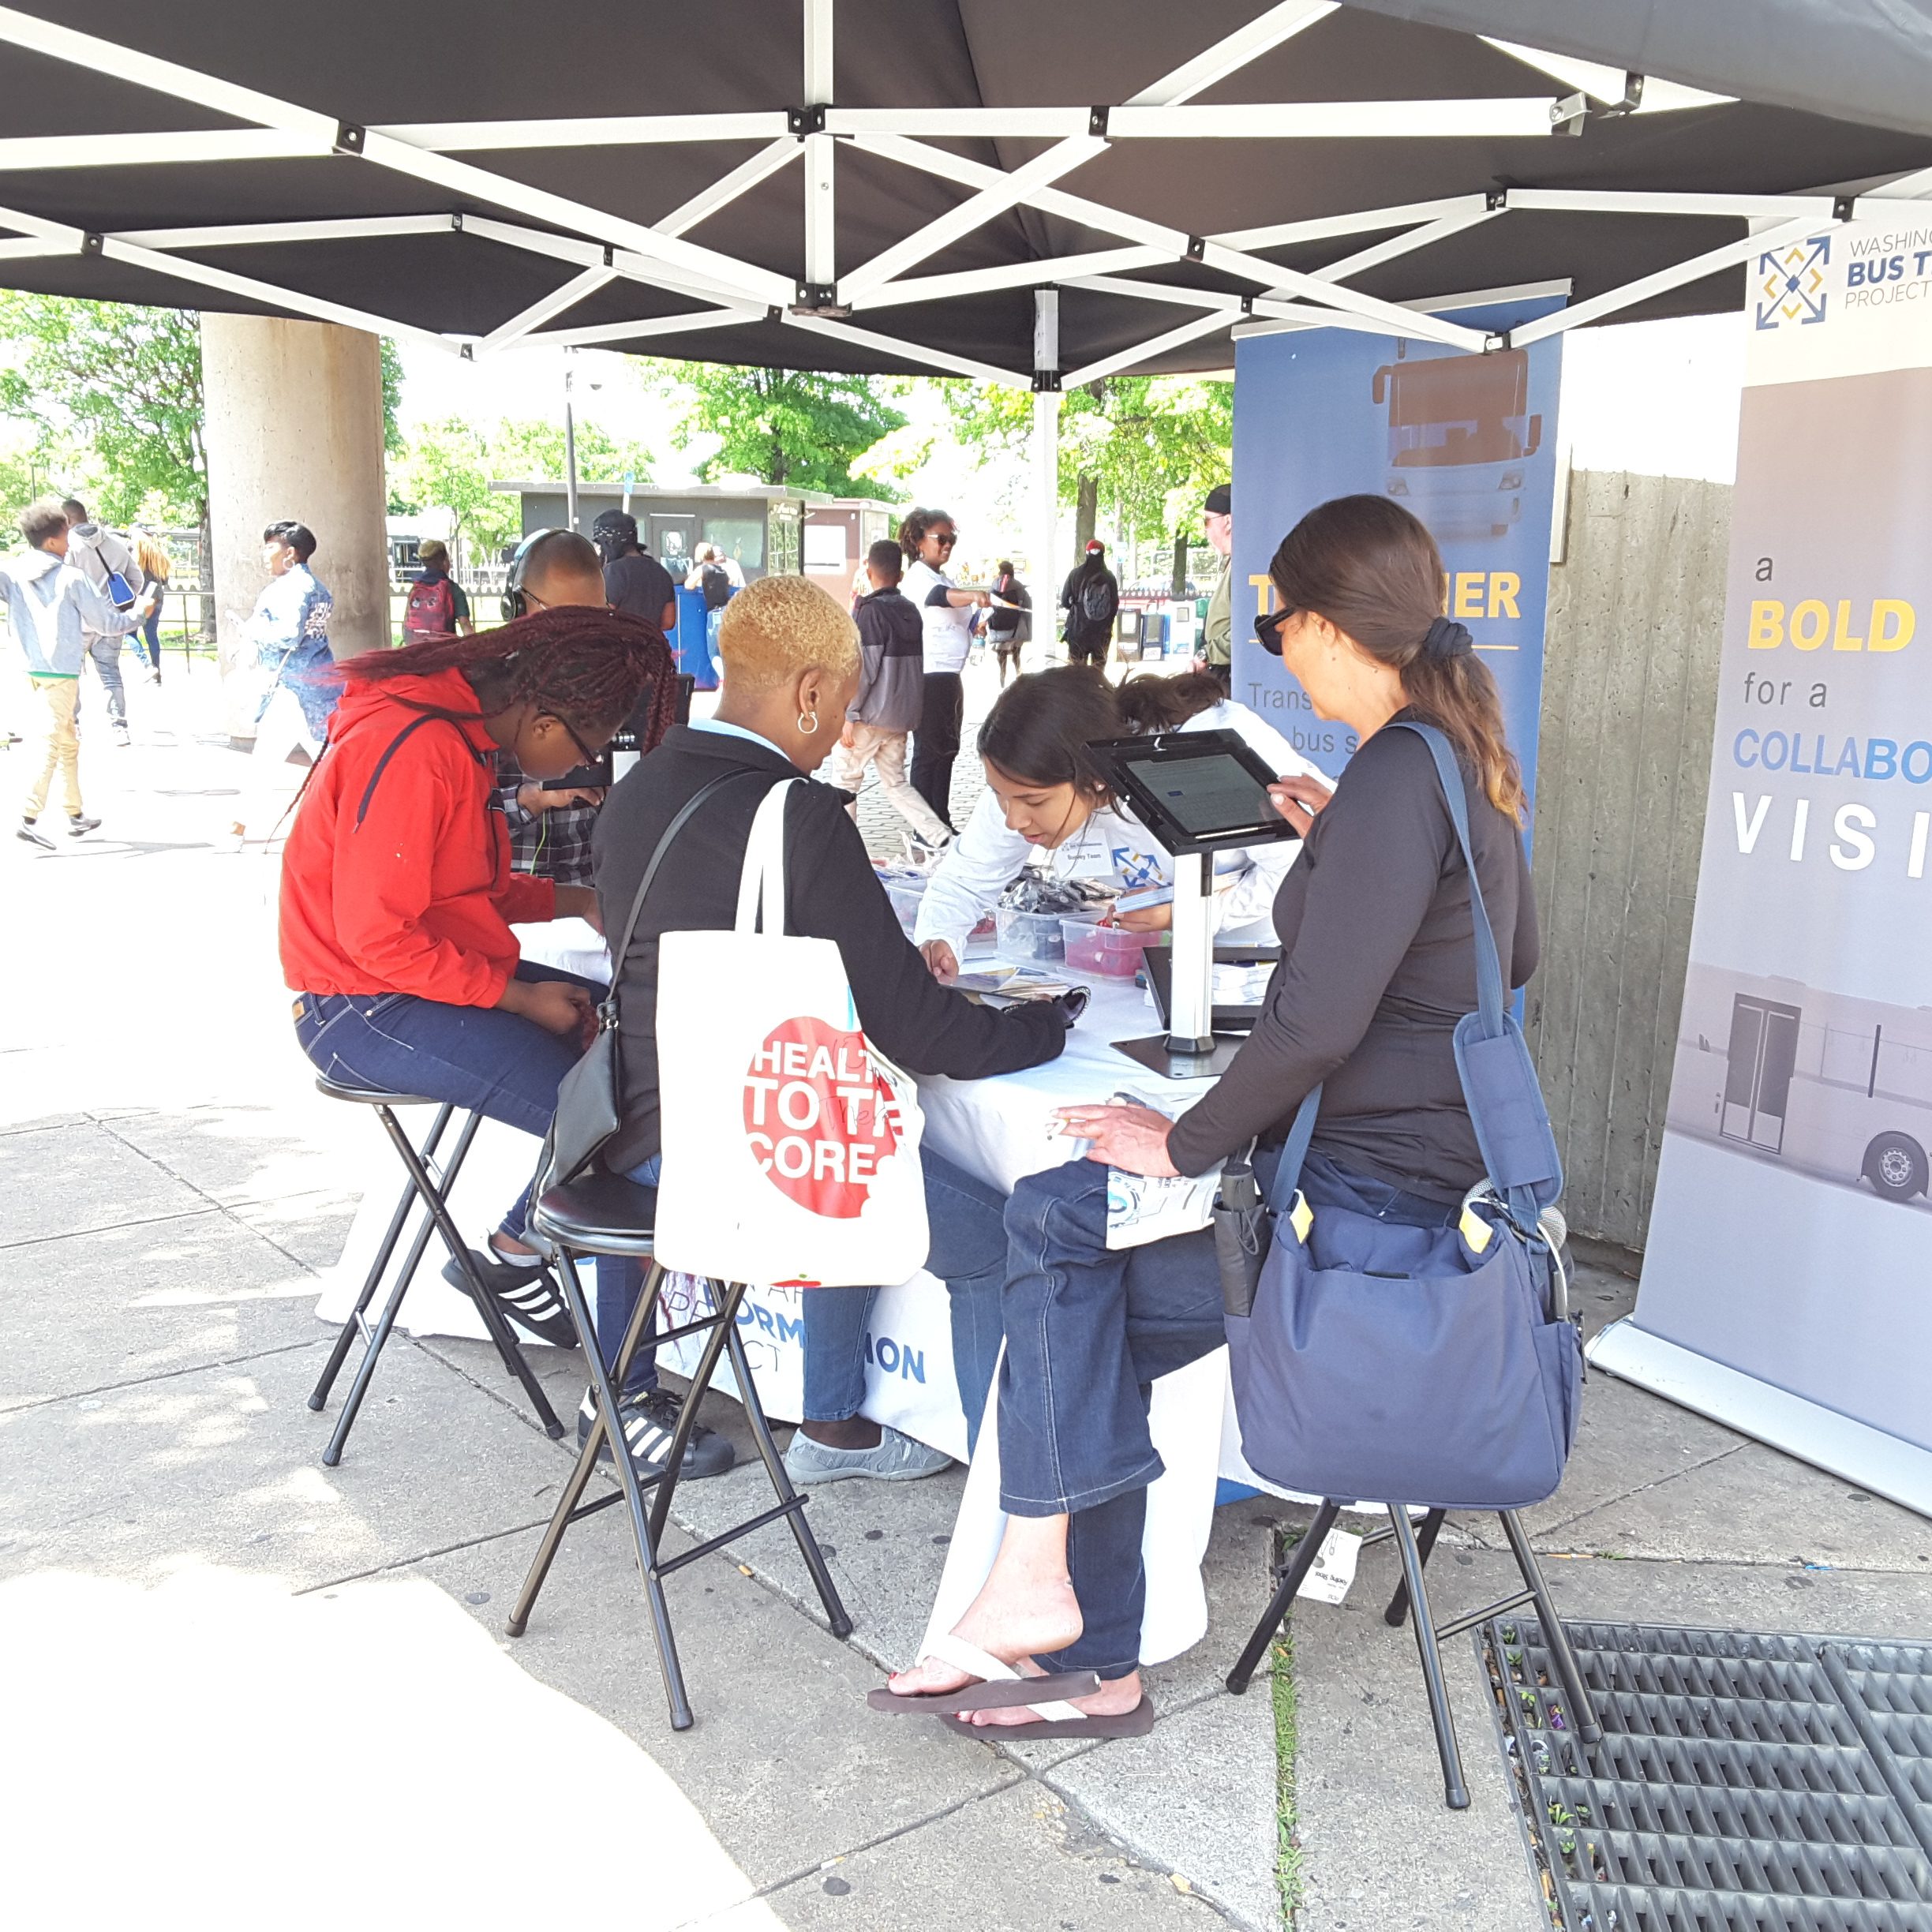 People gathered at the Anacostia Metro Station popup event booth